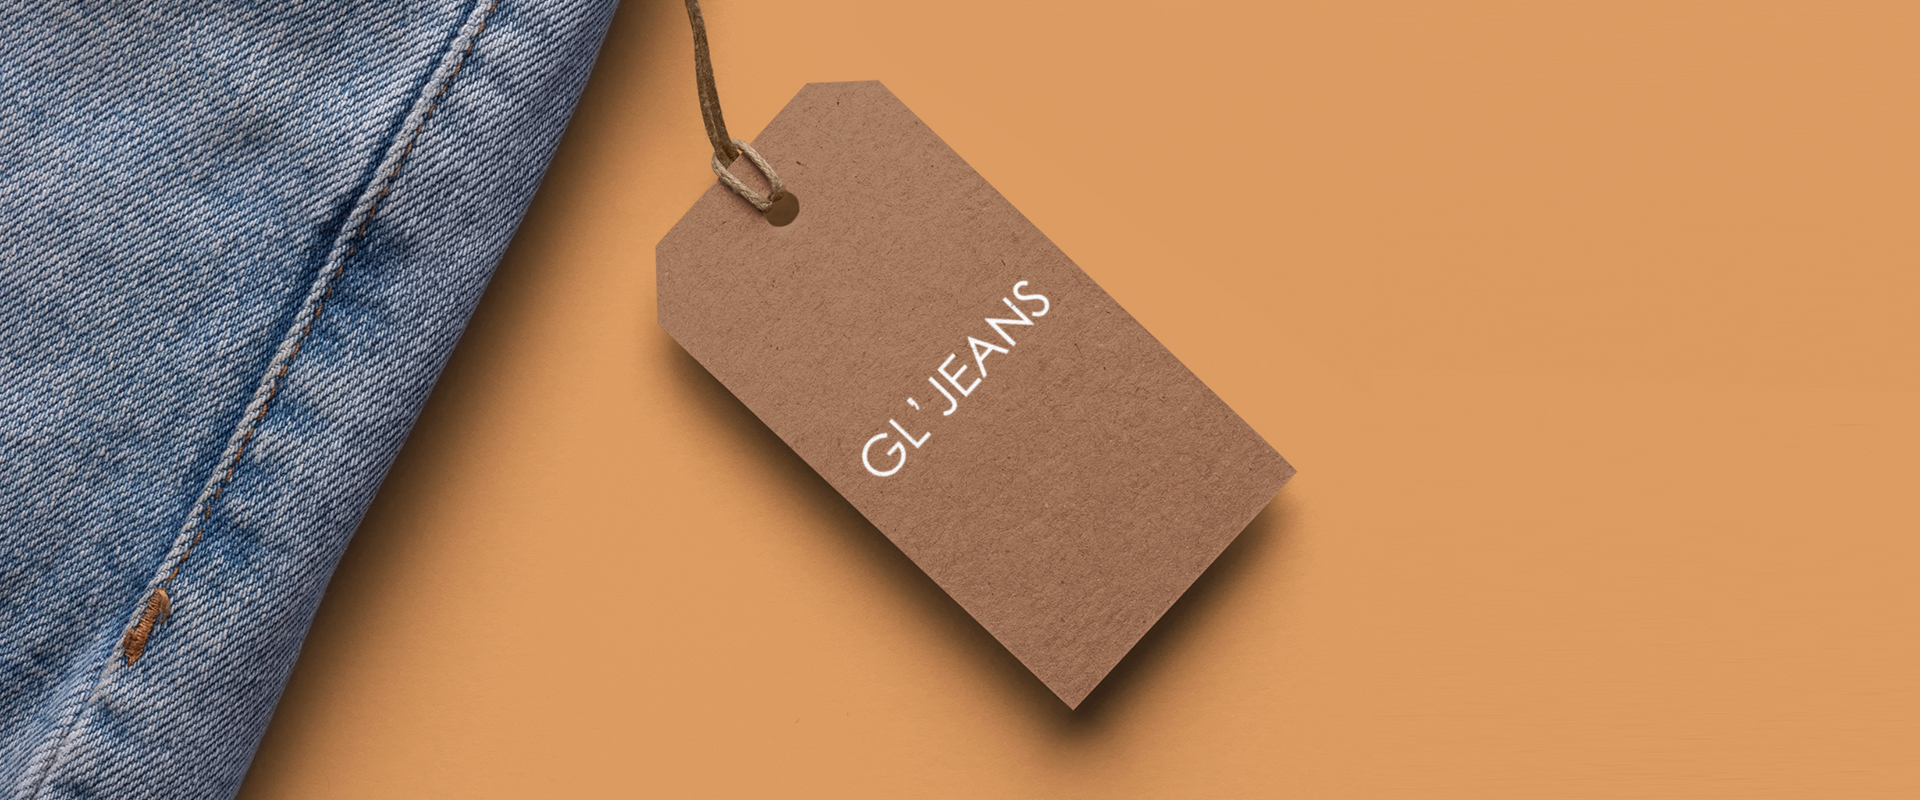 gljeans colombianos